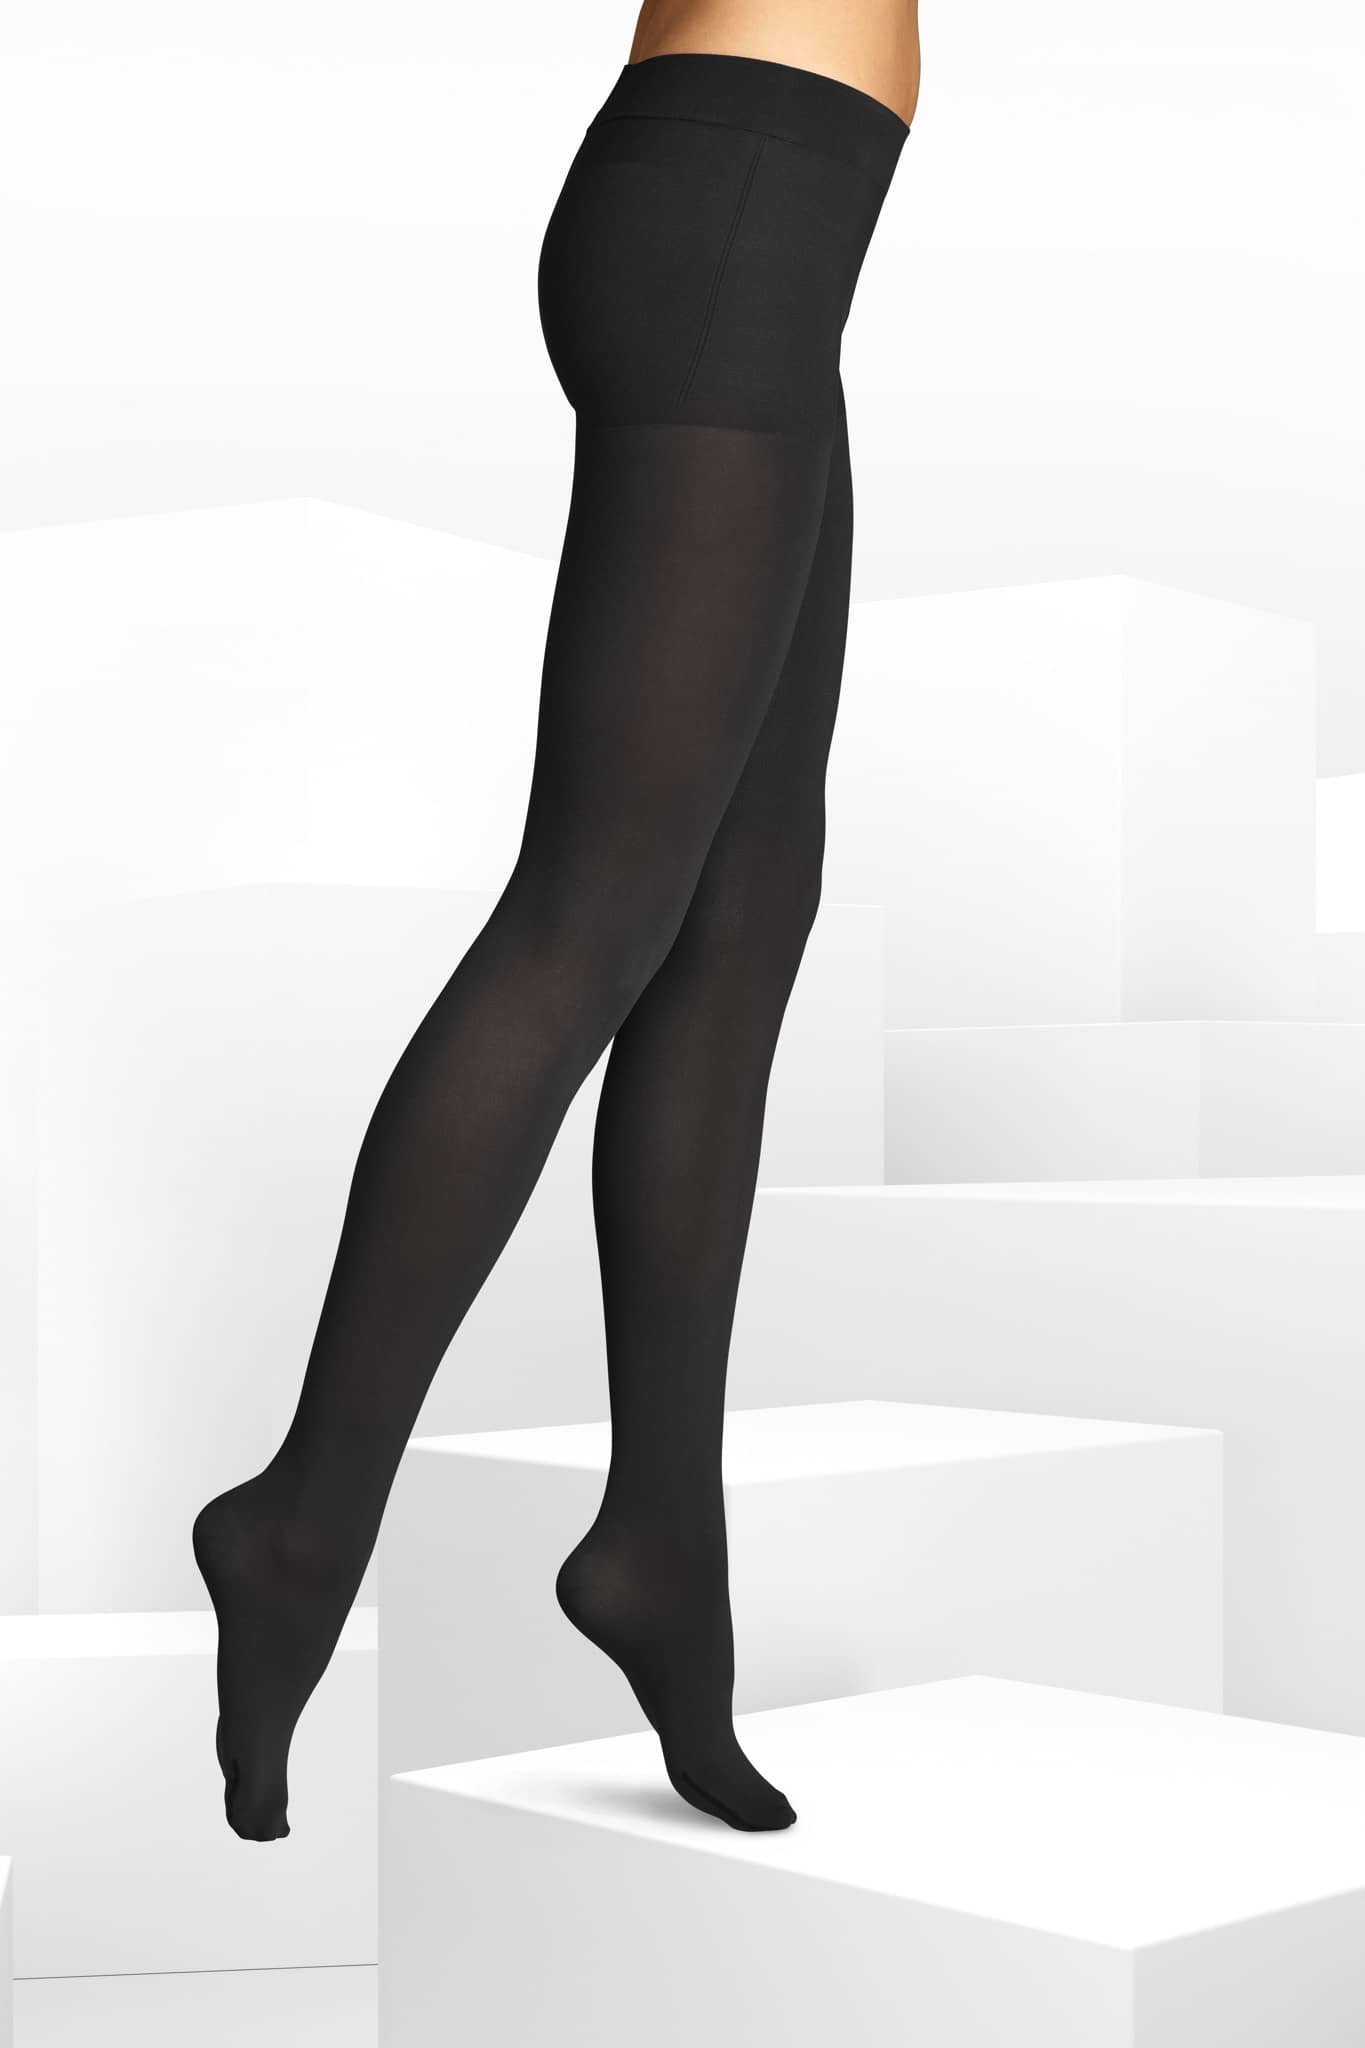 Translucent Sheer Tights, Compression Support Tights